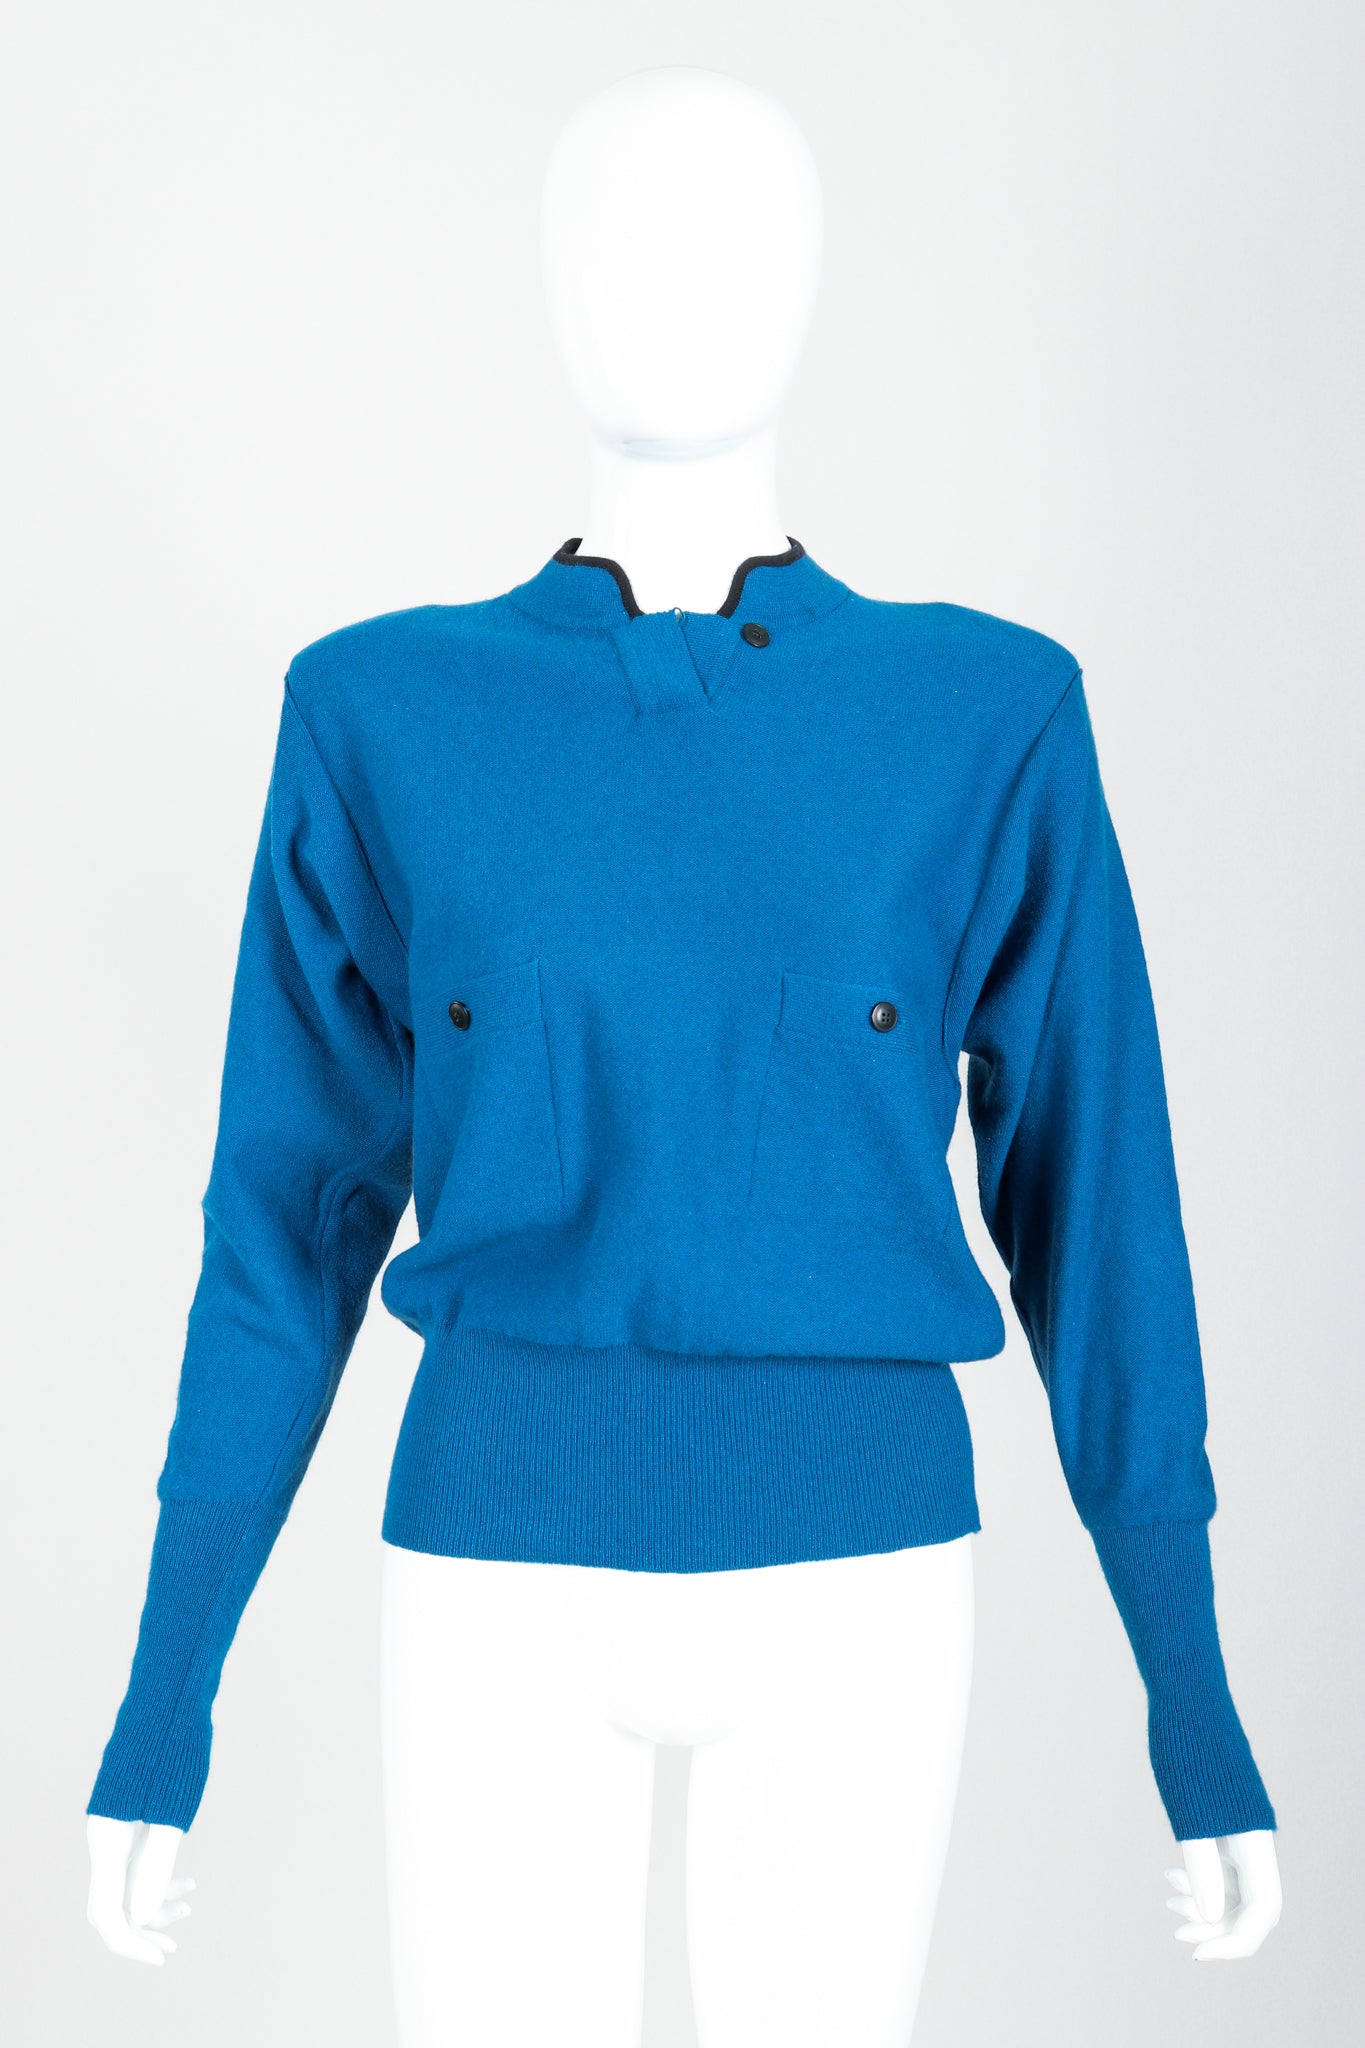 Vintage Sonia Rykiel Blue Knit High Neck Sweater on Mannequin front at Recess